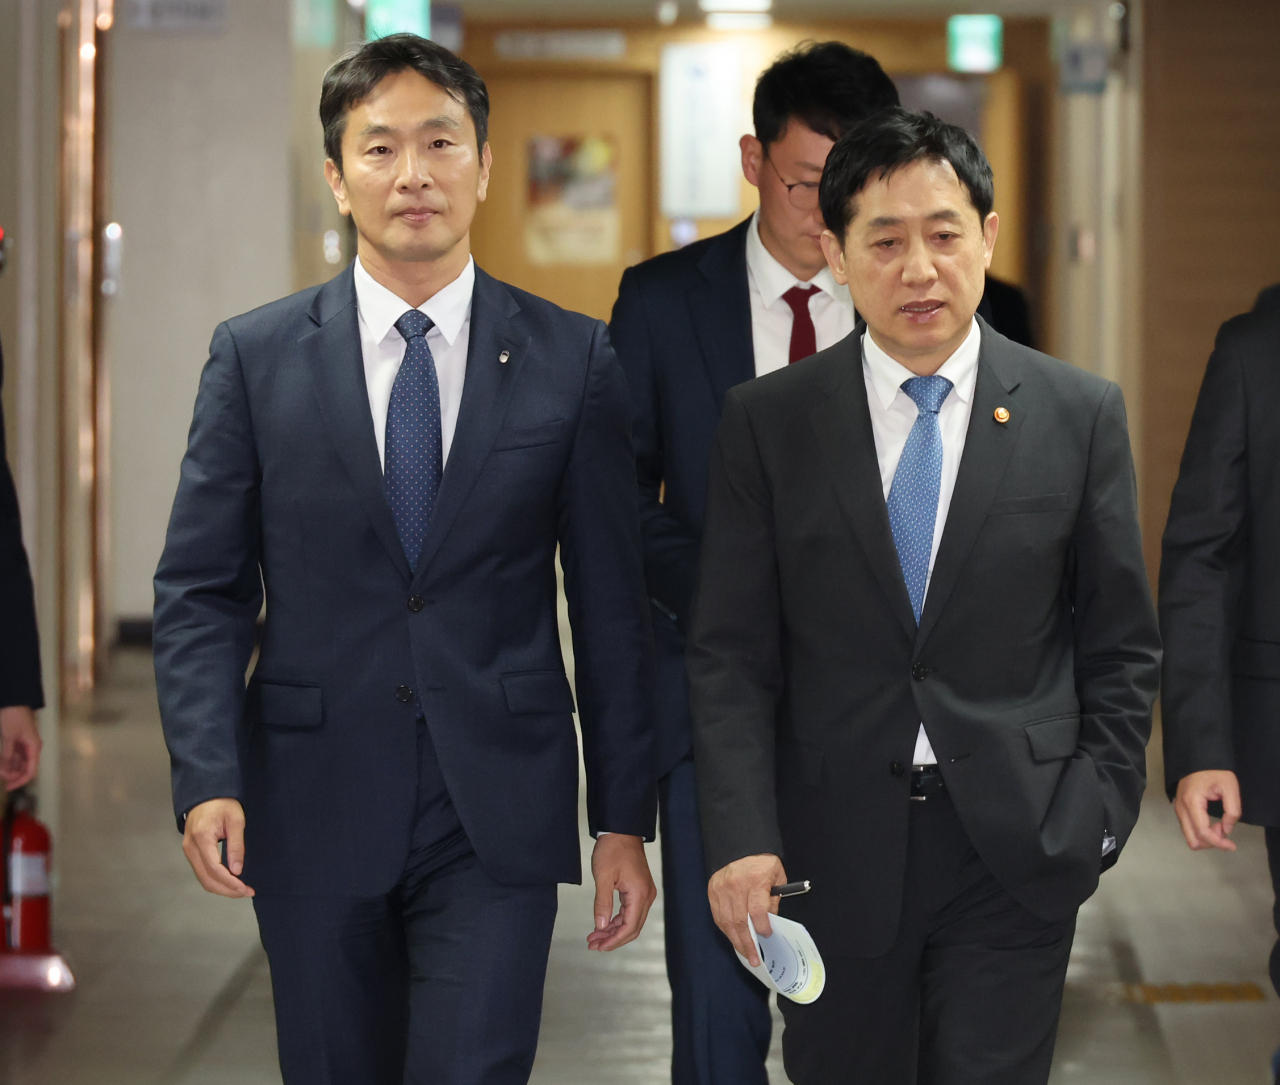 Financial Services Commission Chairman Kim Joo-hyun (right) and Financial Supervisory Service Governor Lee Bok-hyun walk toward a press briefing room at the government complex in Seoul on Sunday. (Yonhap)